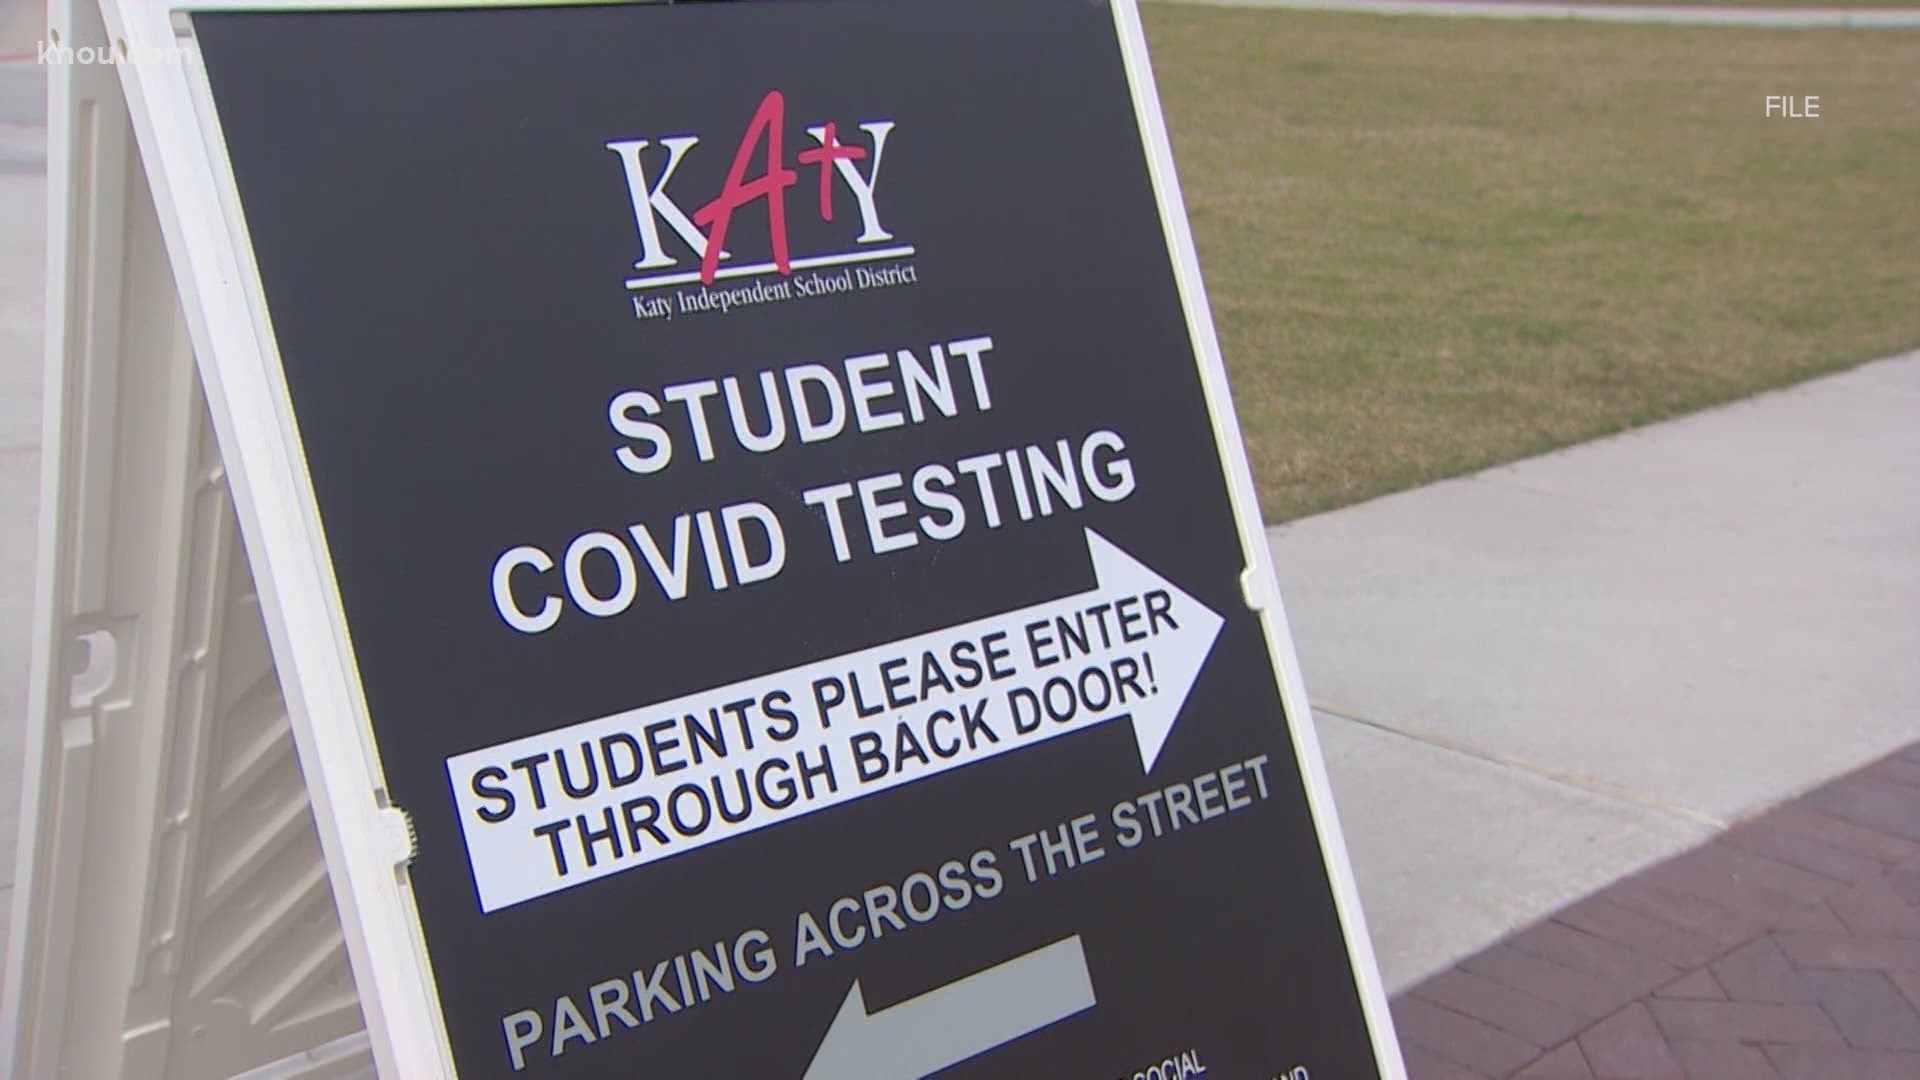 Medical doctors from across Texas are recommending that schools test students and staff for COVID-19 to help prevent outbreaks.